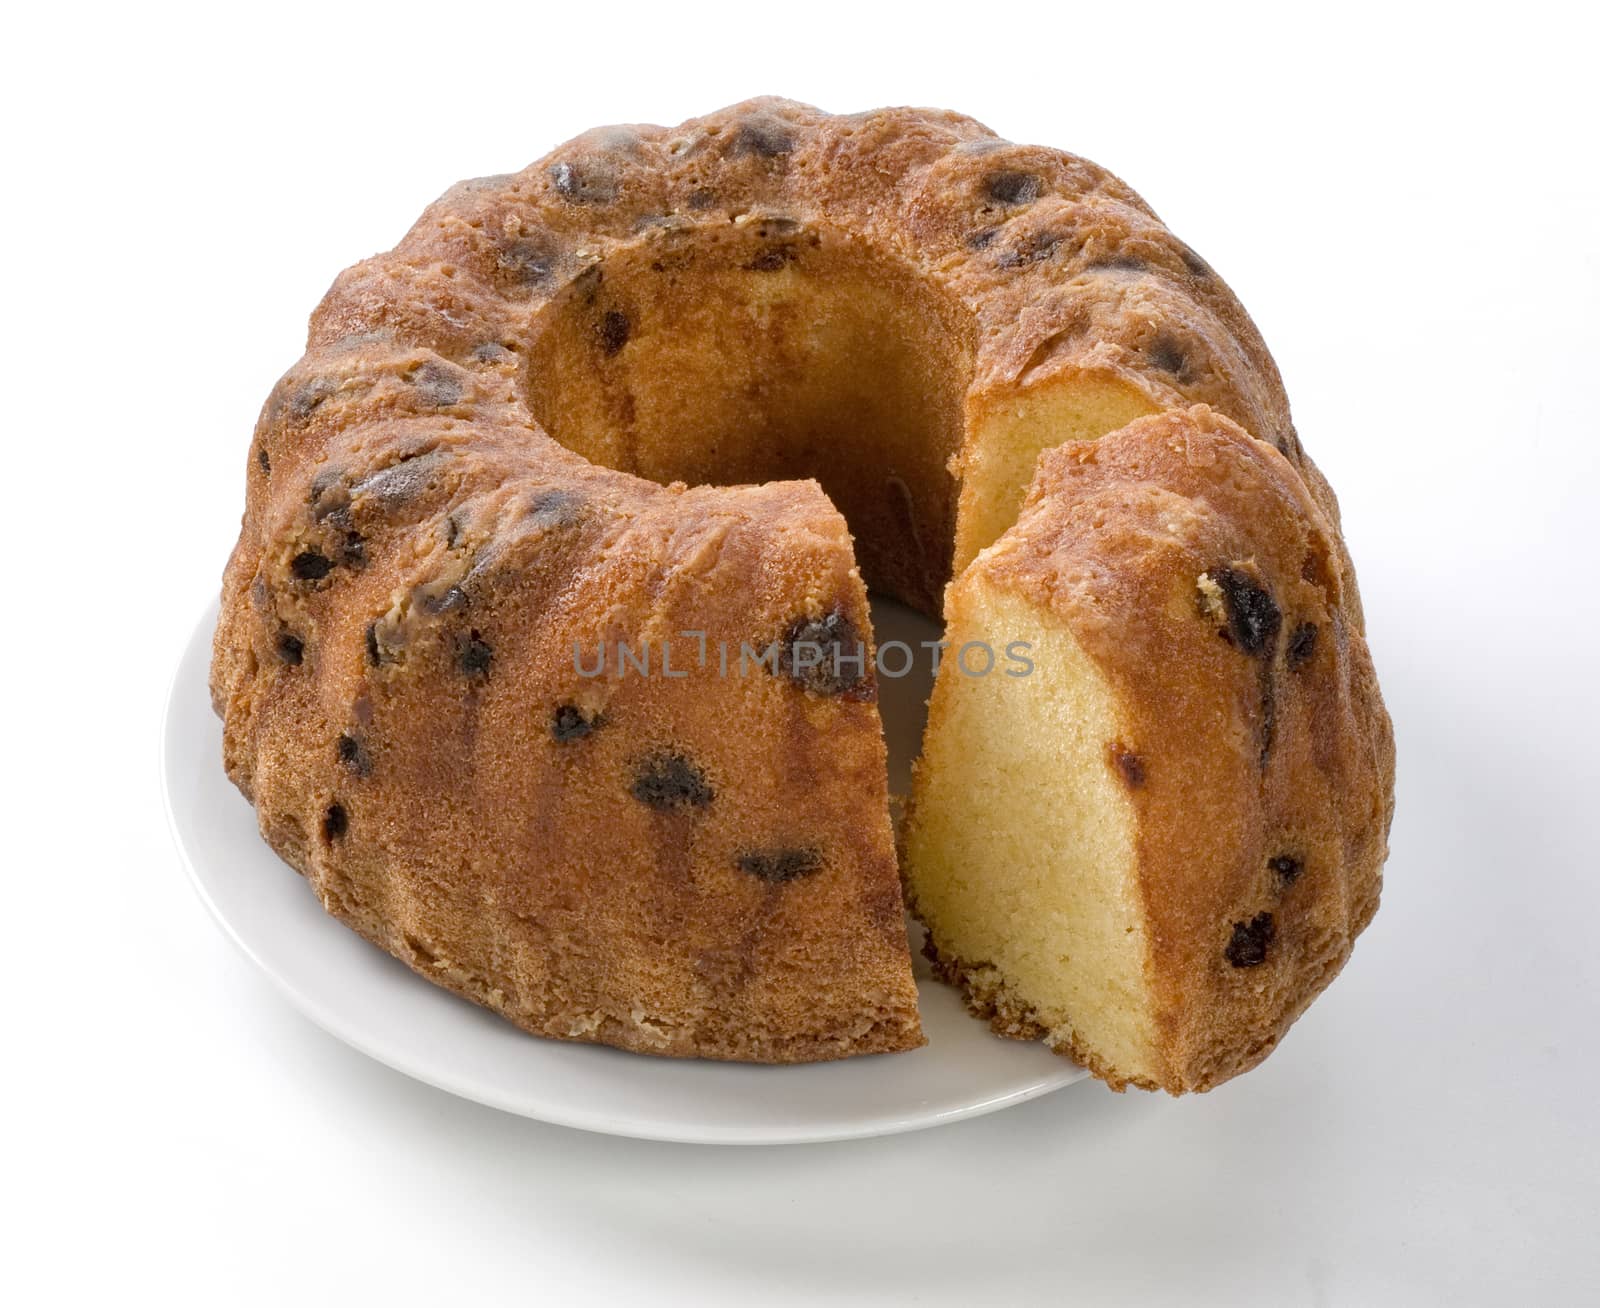 Sliced yellow Cake with raisins on a White Plate by janssenkruseproductions